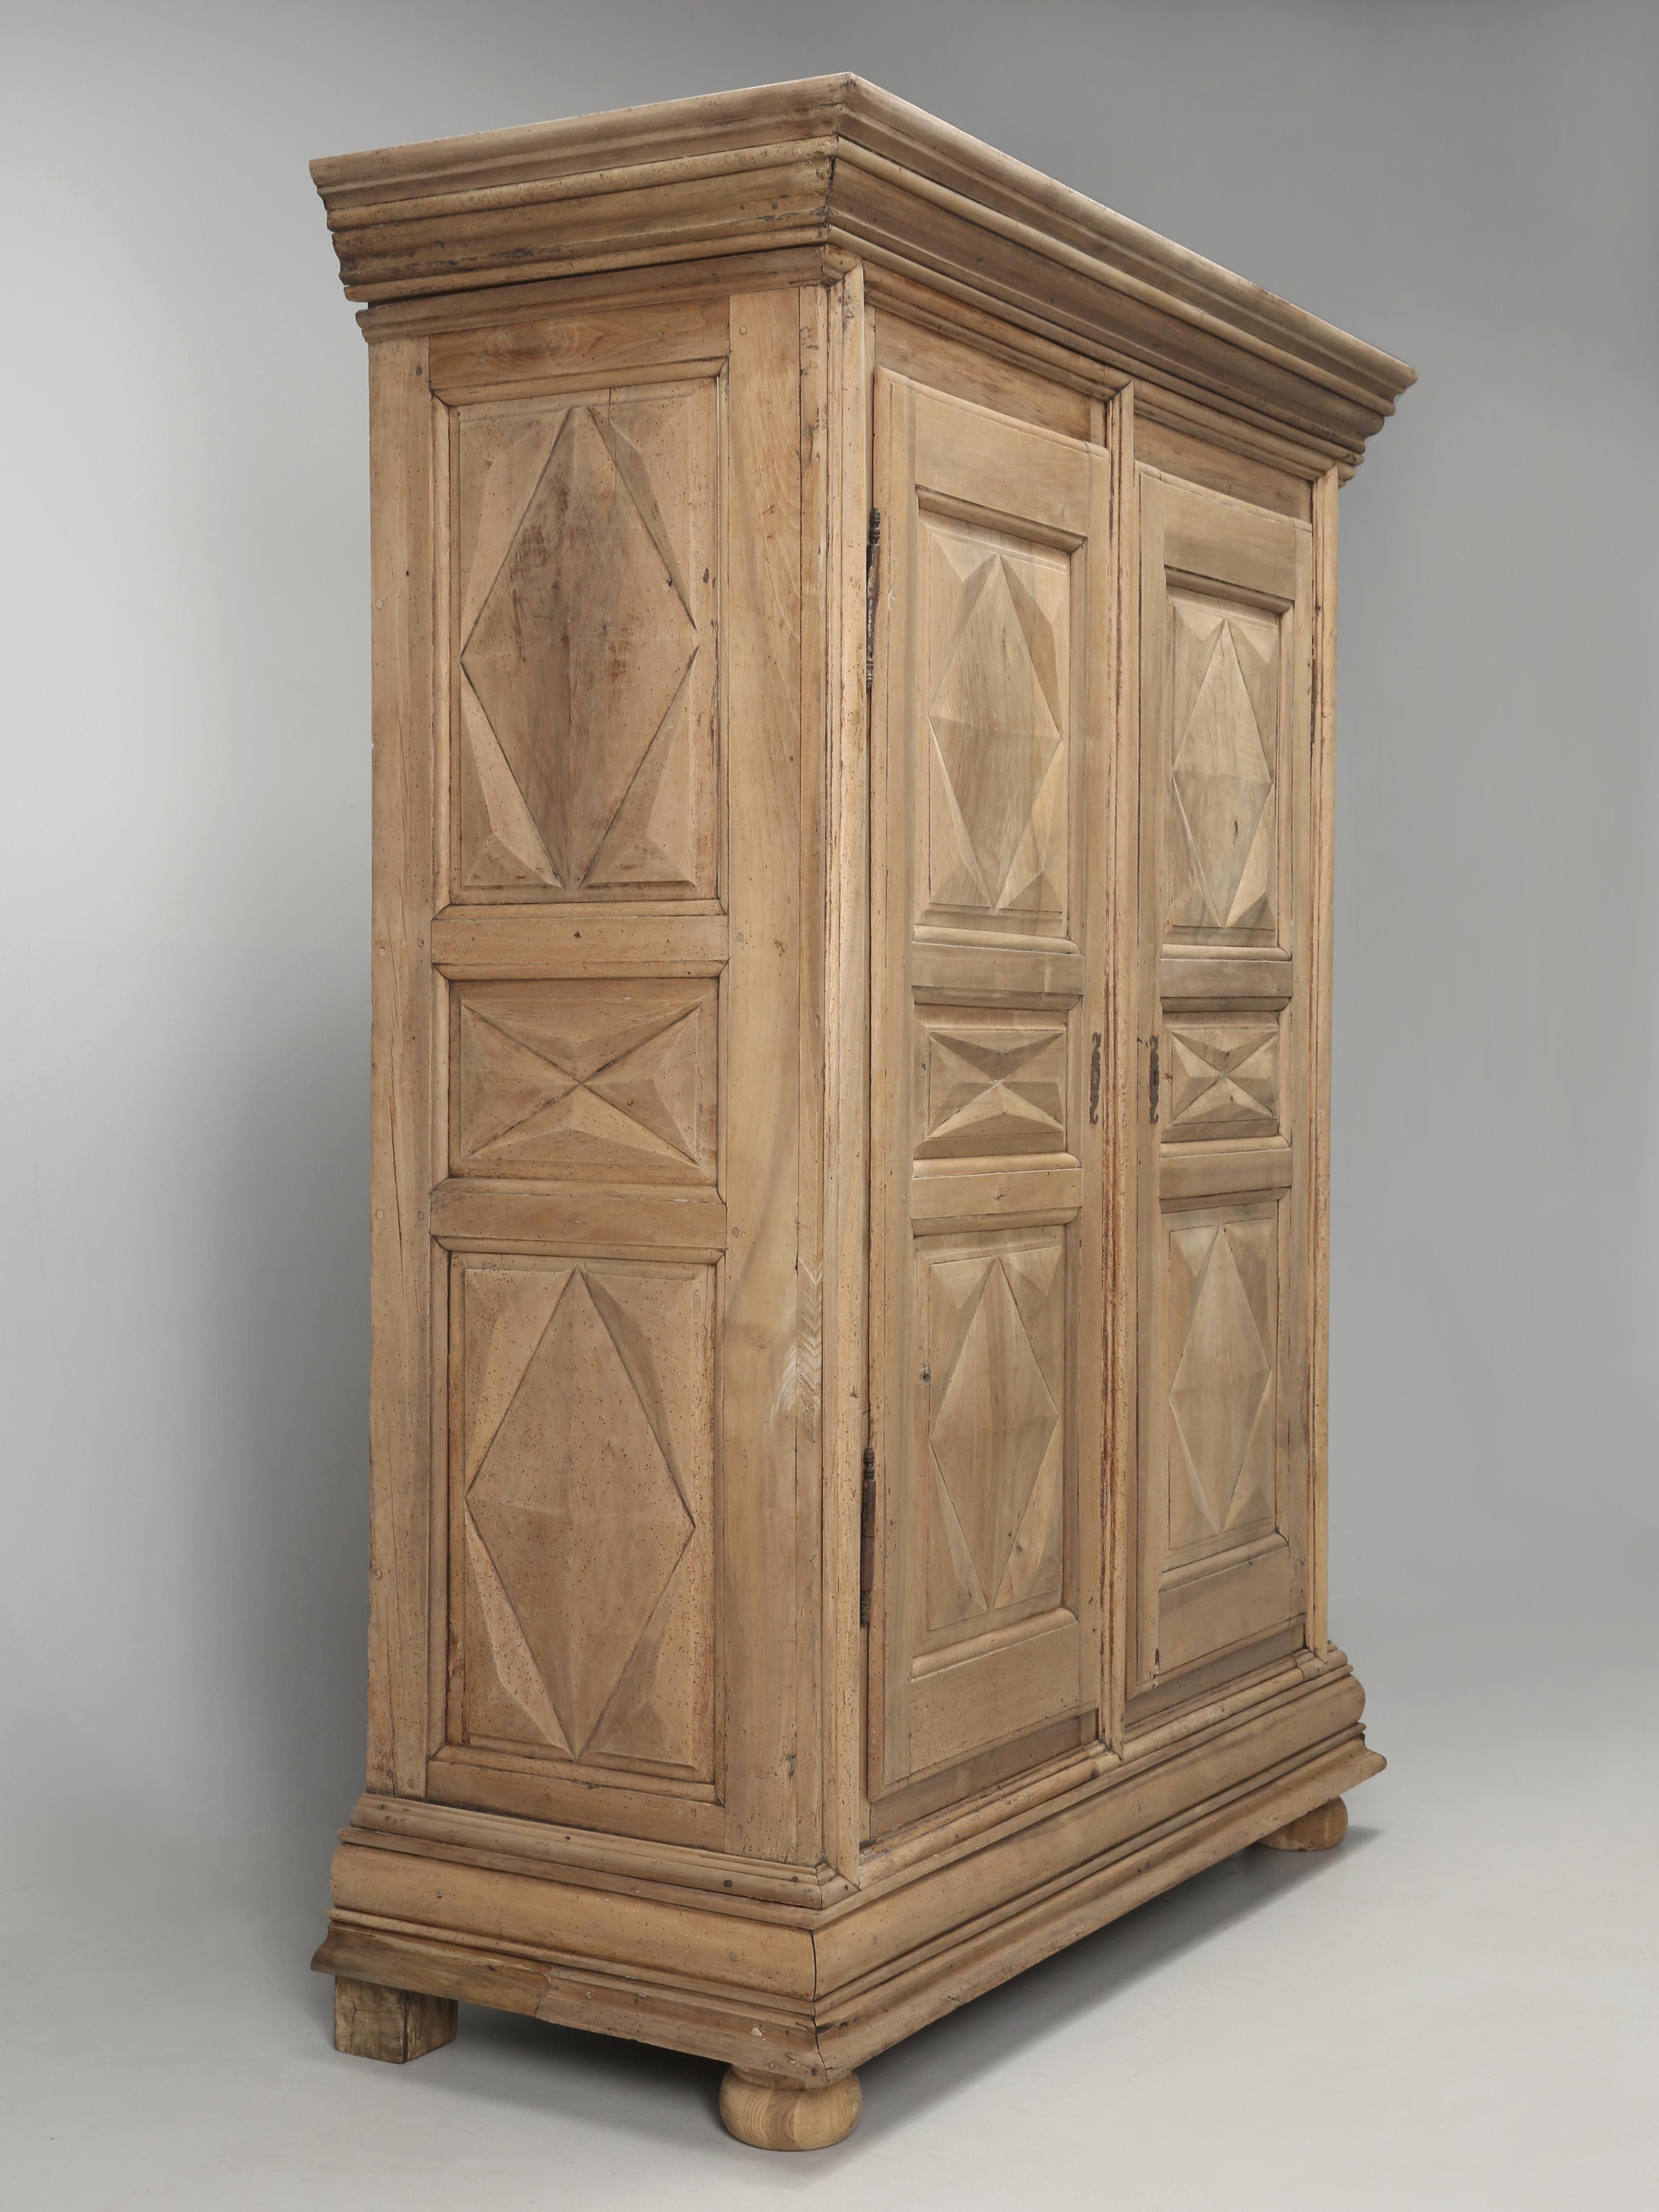 Louis XIII Antique French Armoire in Natural Washed Walnut Very Original Over 300-Years Old